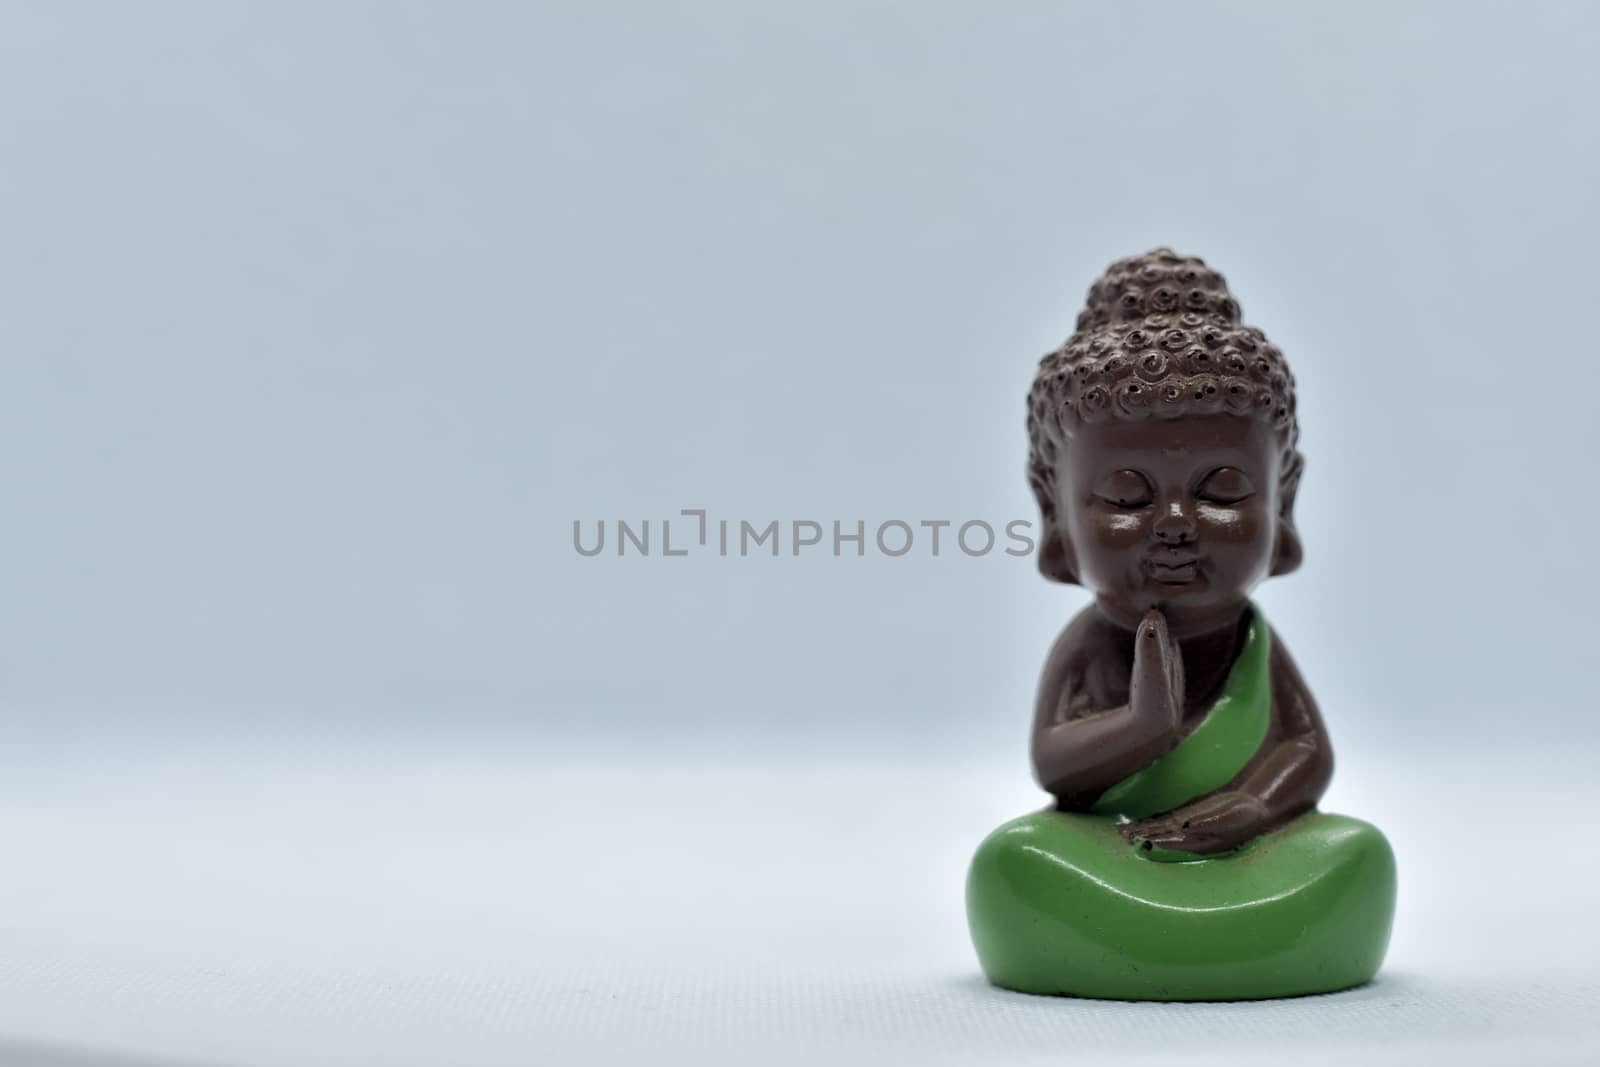 Chinese traditional little monk figure one by rkbalaji